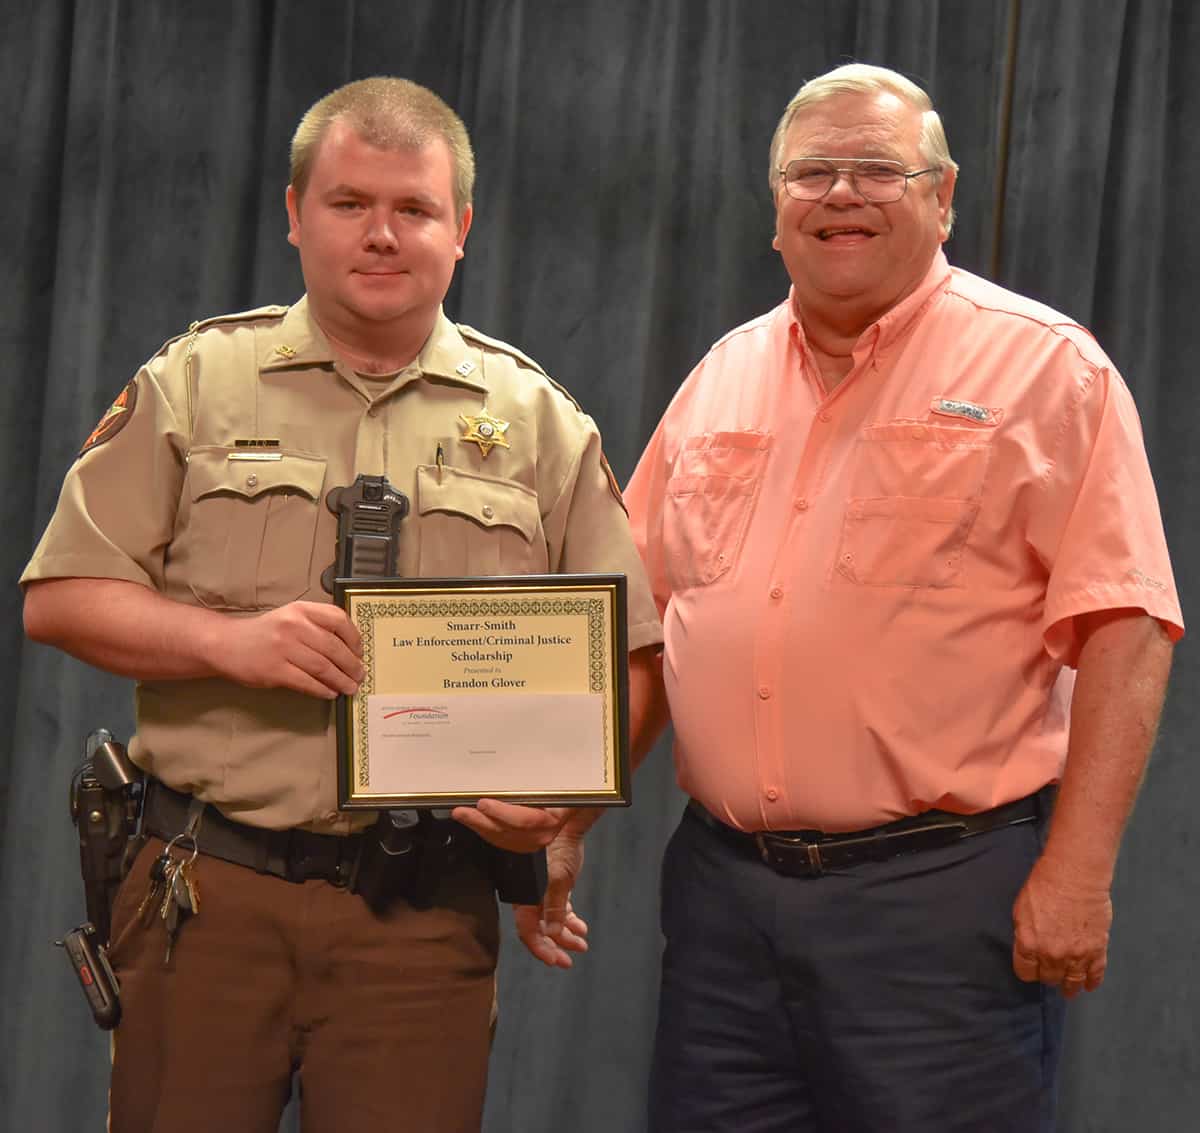 Paul Johnson (right) is shown above recognizing Brandon Glover (left) of the Sumter County Sheriff’s Office with a Smarr-Smith Criminal Justice Scholarship.